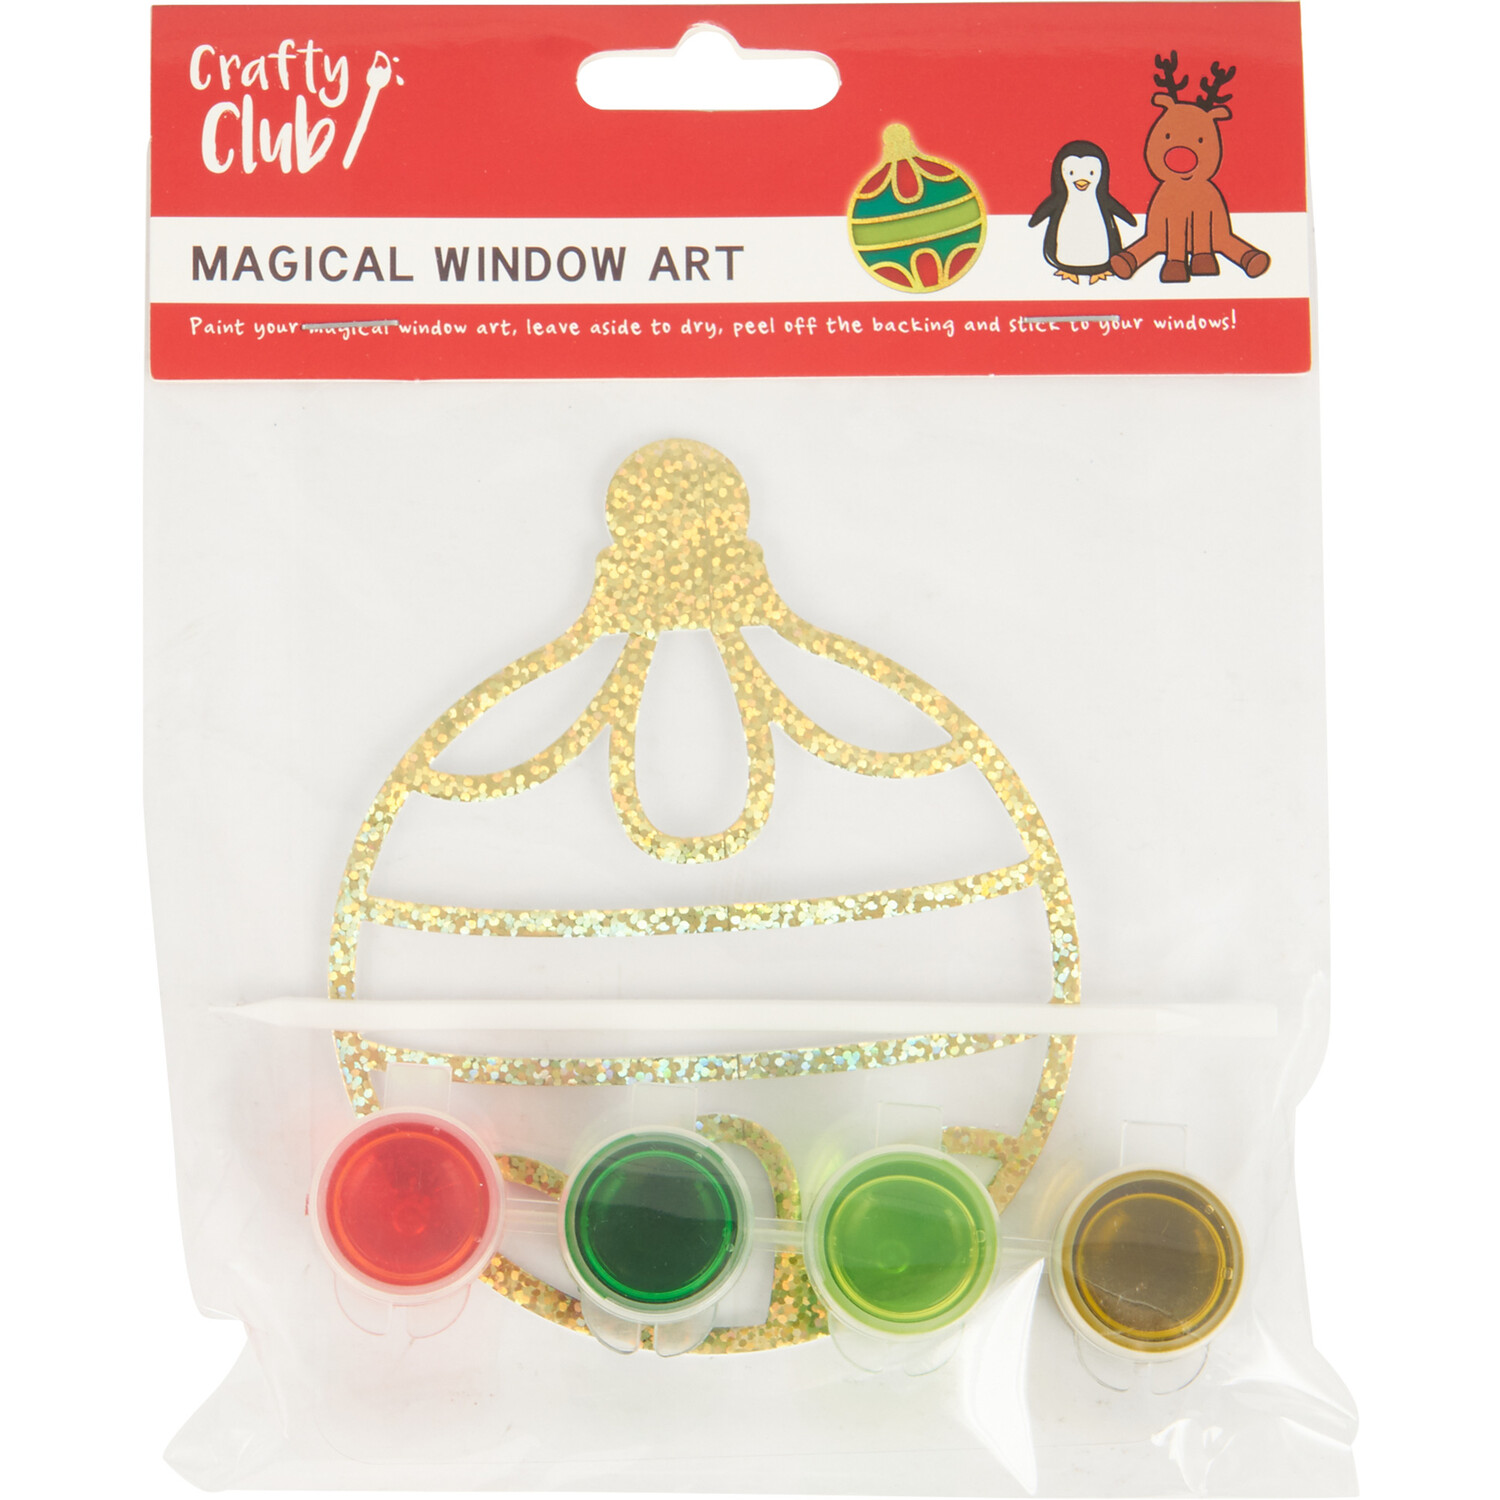 Single Crafty Club Magical Window Art Set in Assorted styles Image 5